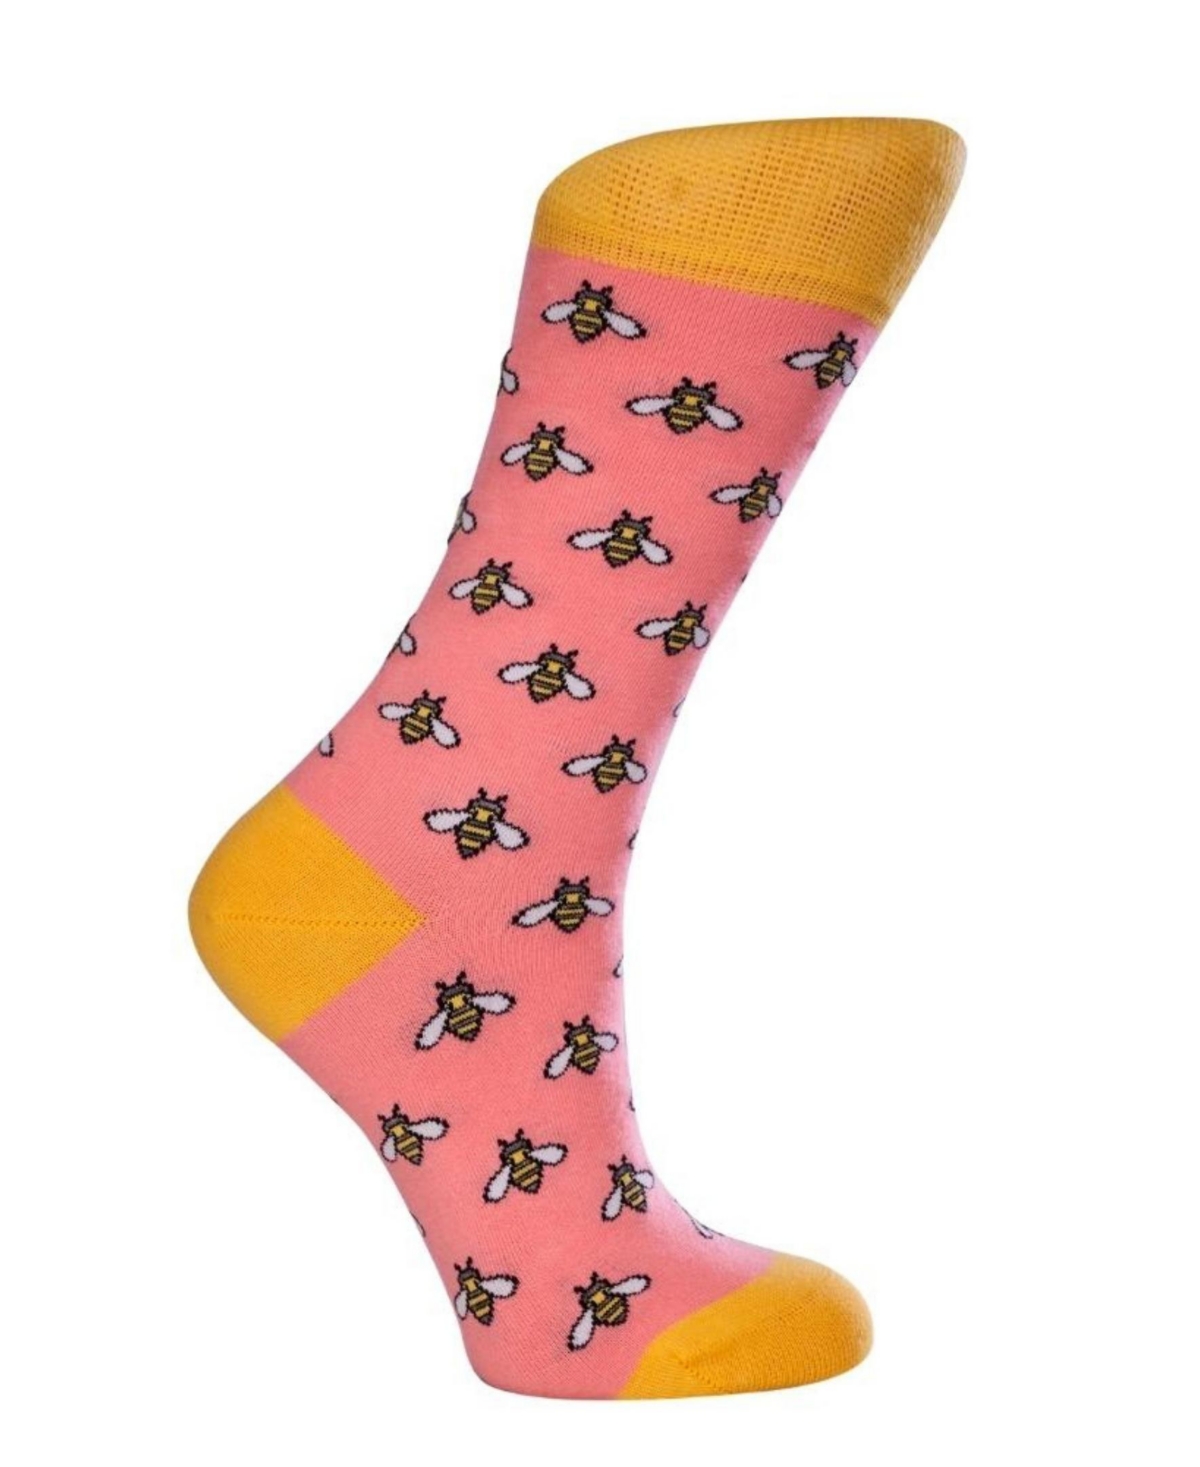 Love Sock Company Women's Bee W-Cotton Novelty Crew Socks with Seamless Toe Design, Pack of 1